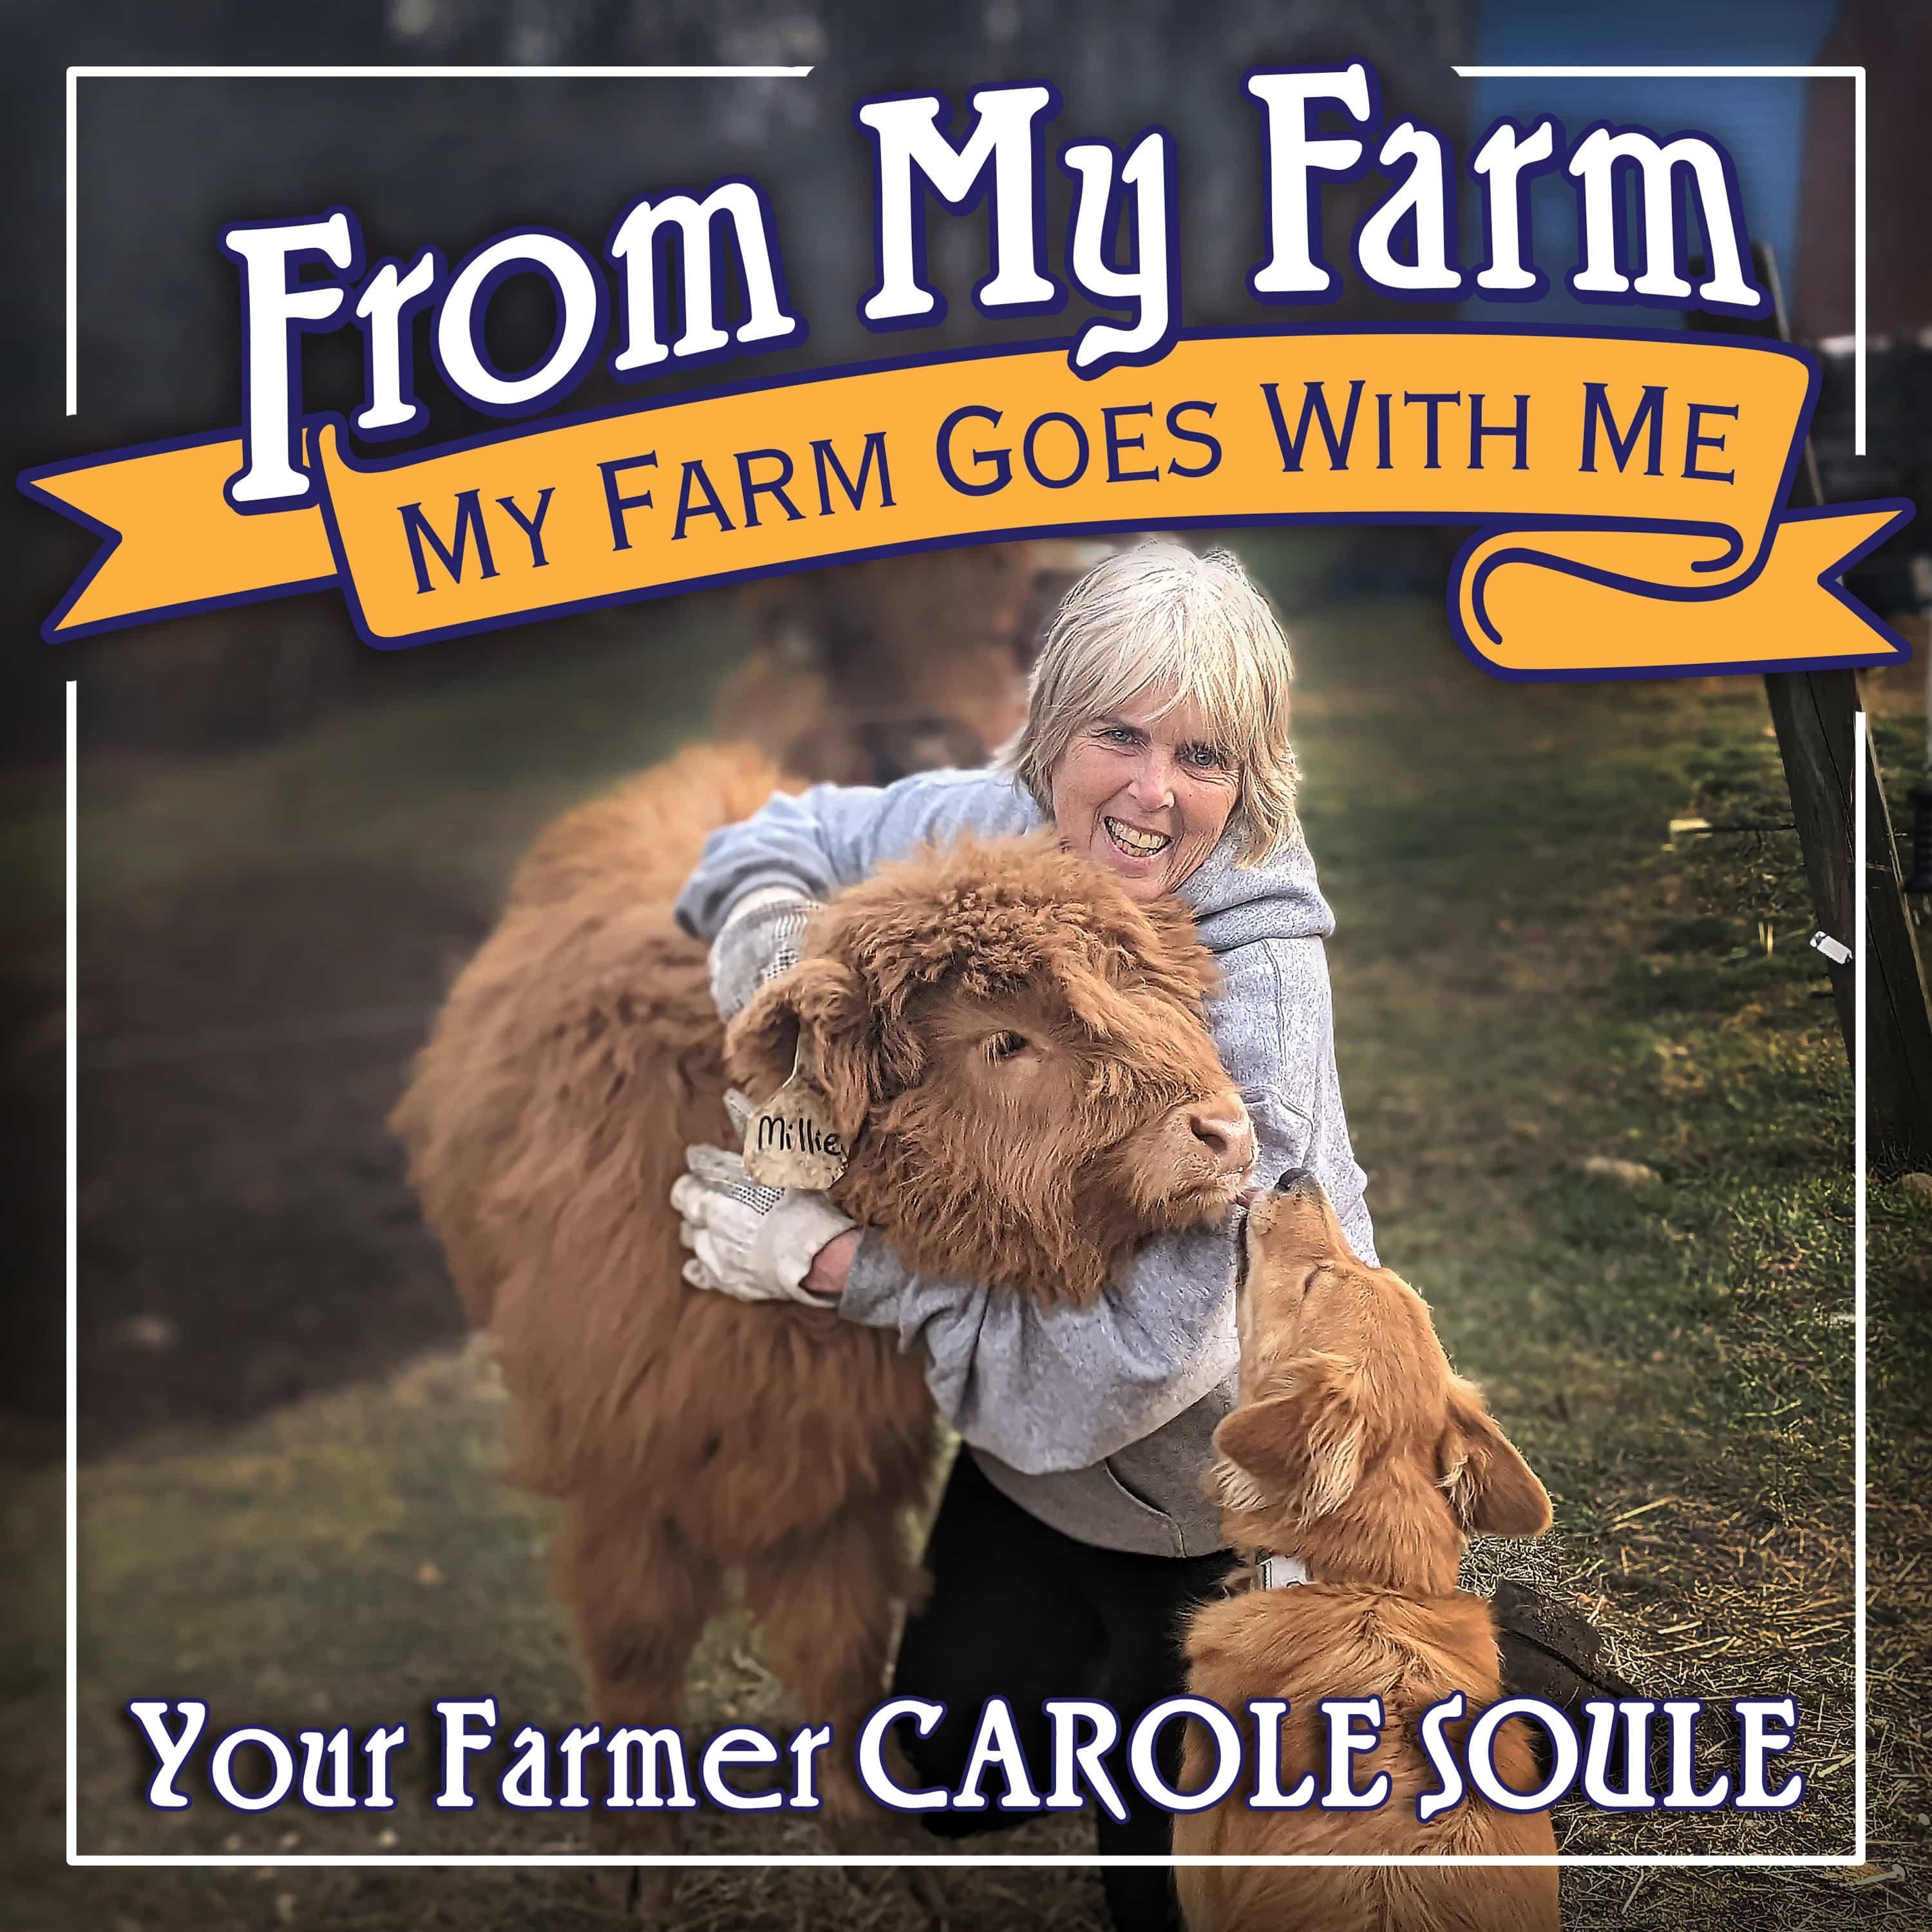 From My Farm: My Farm Goes With Me